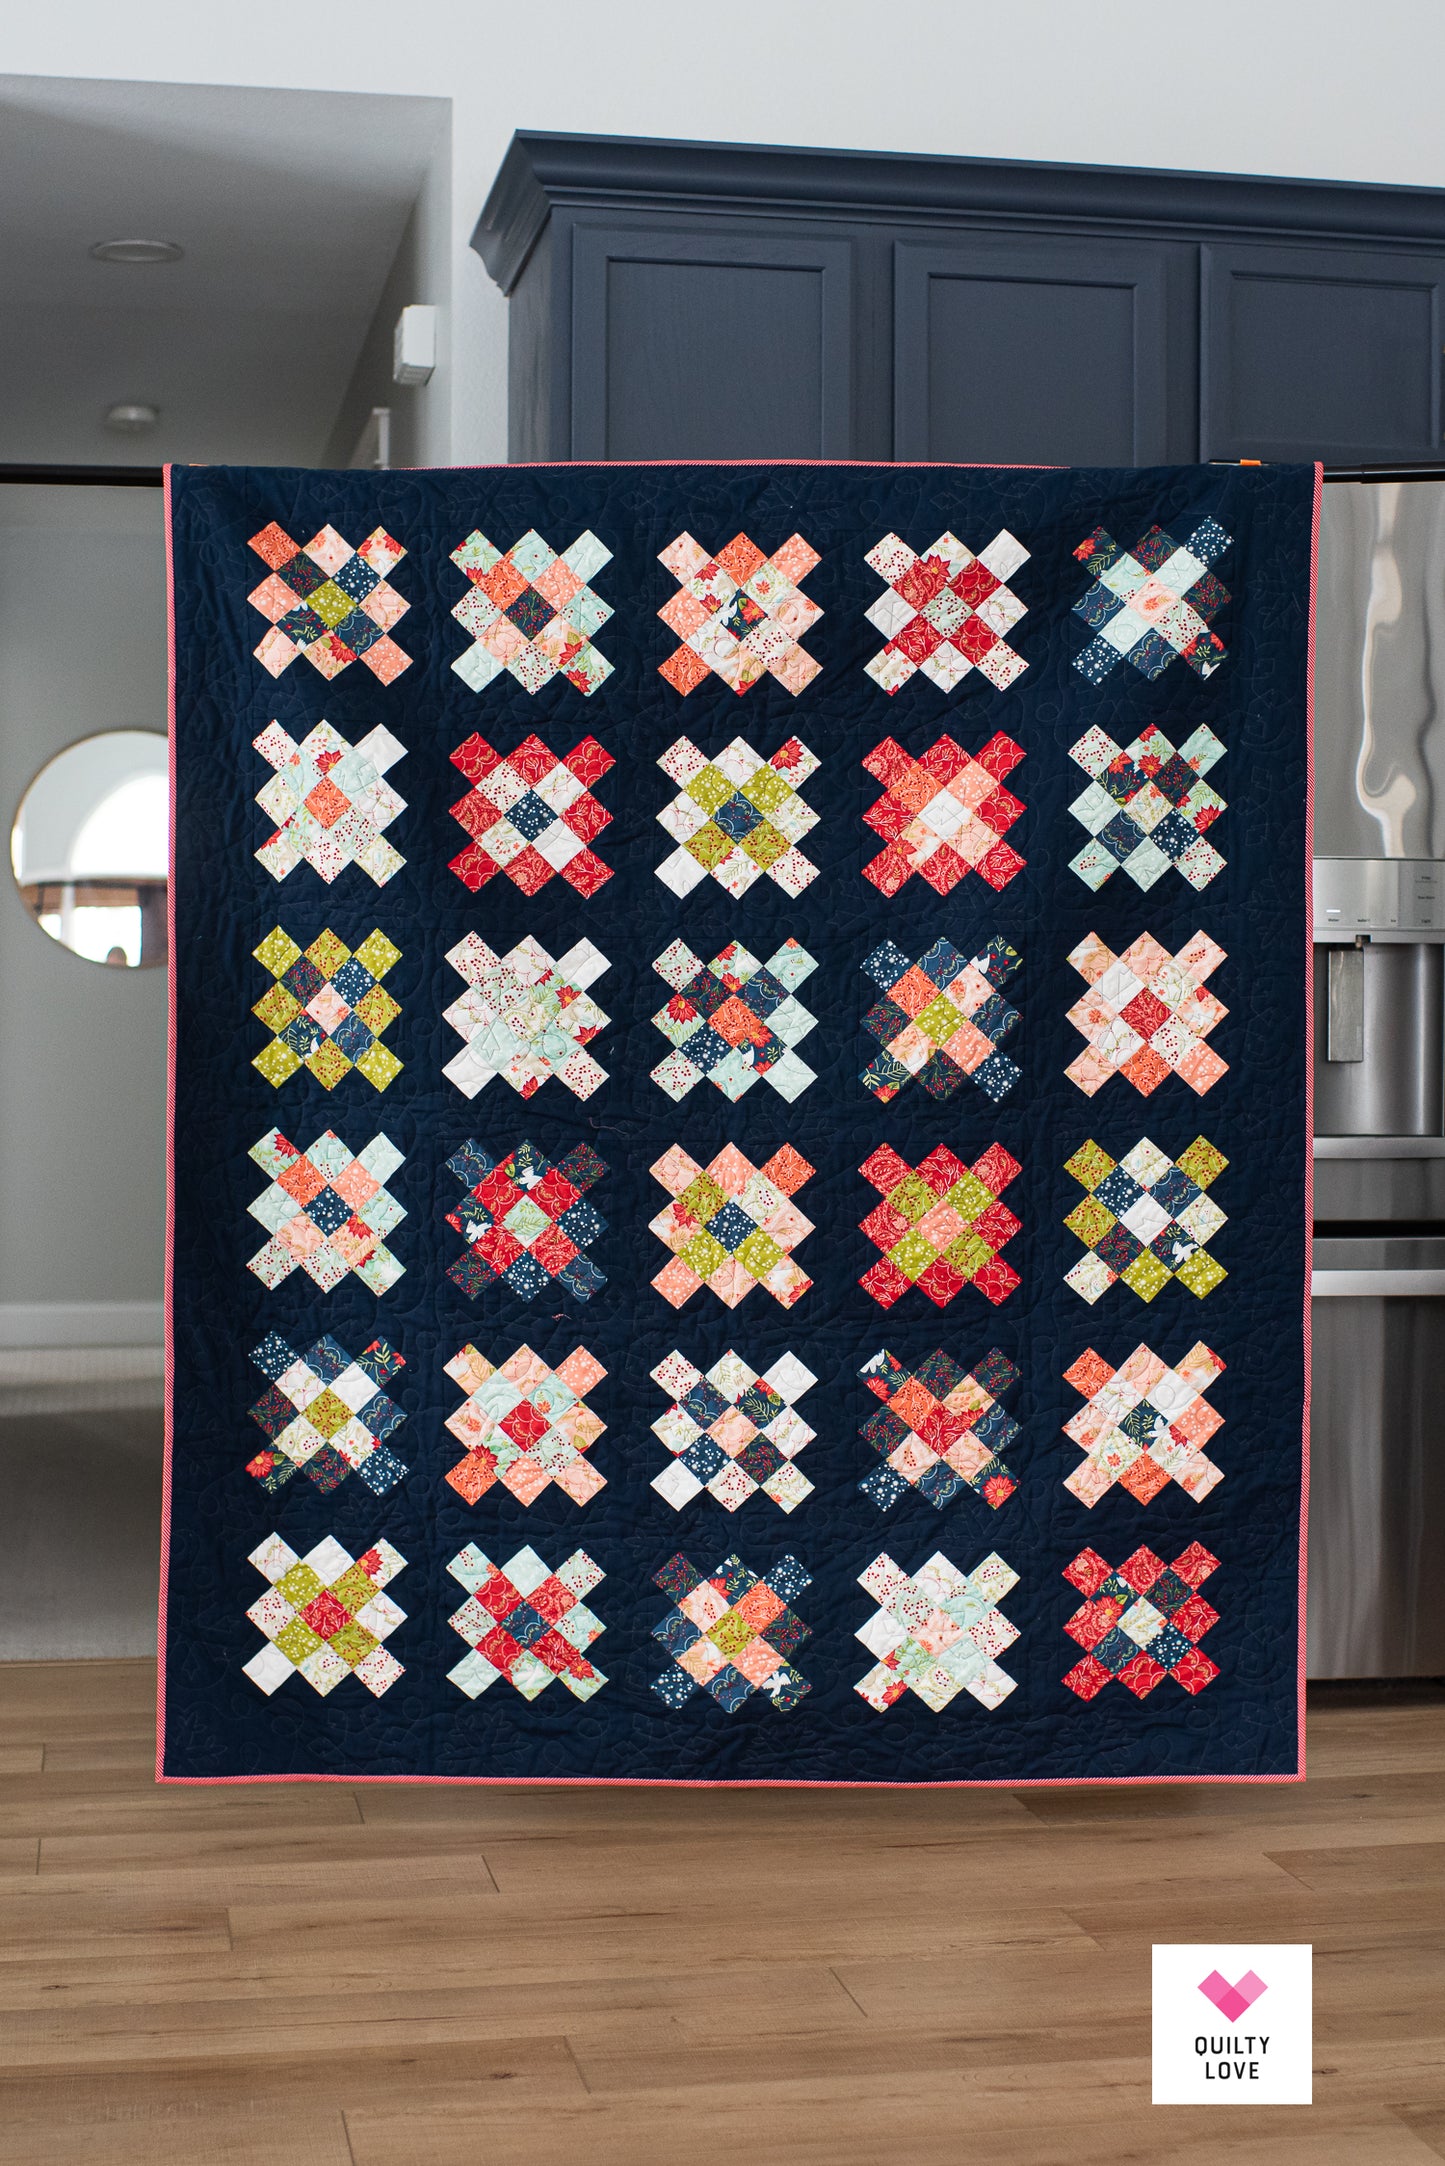 Scrappy Granny Squares Quilt - The Christmas One